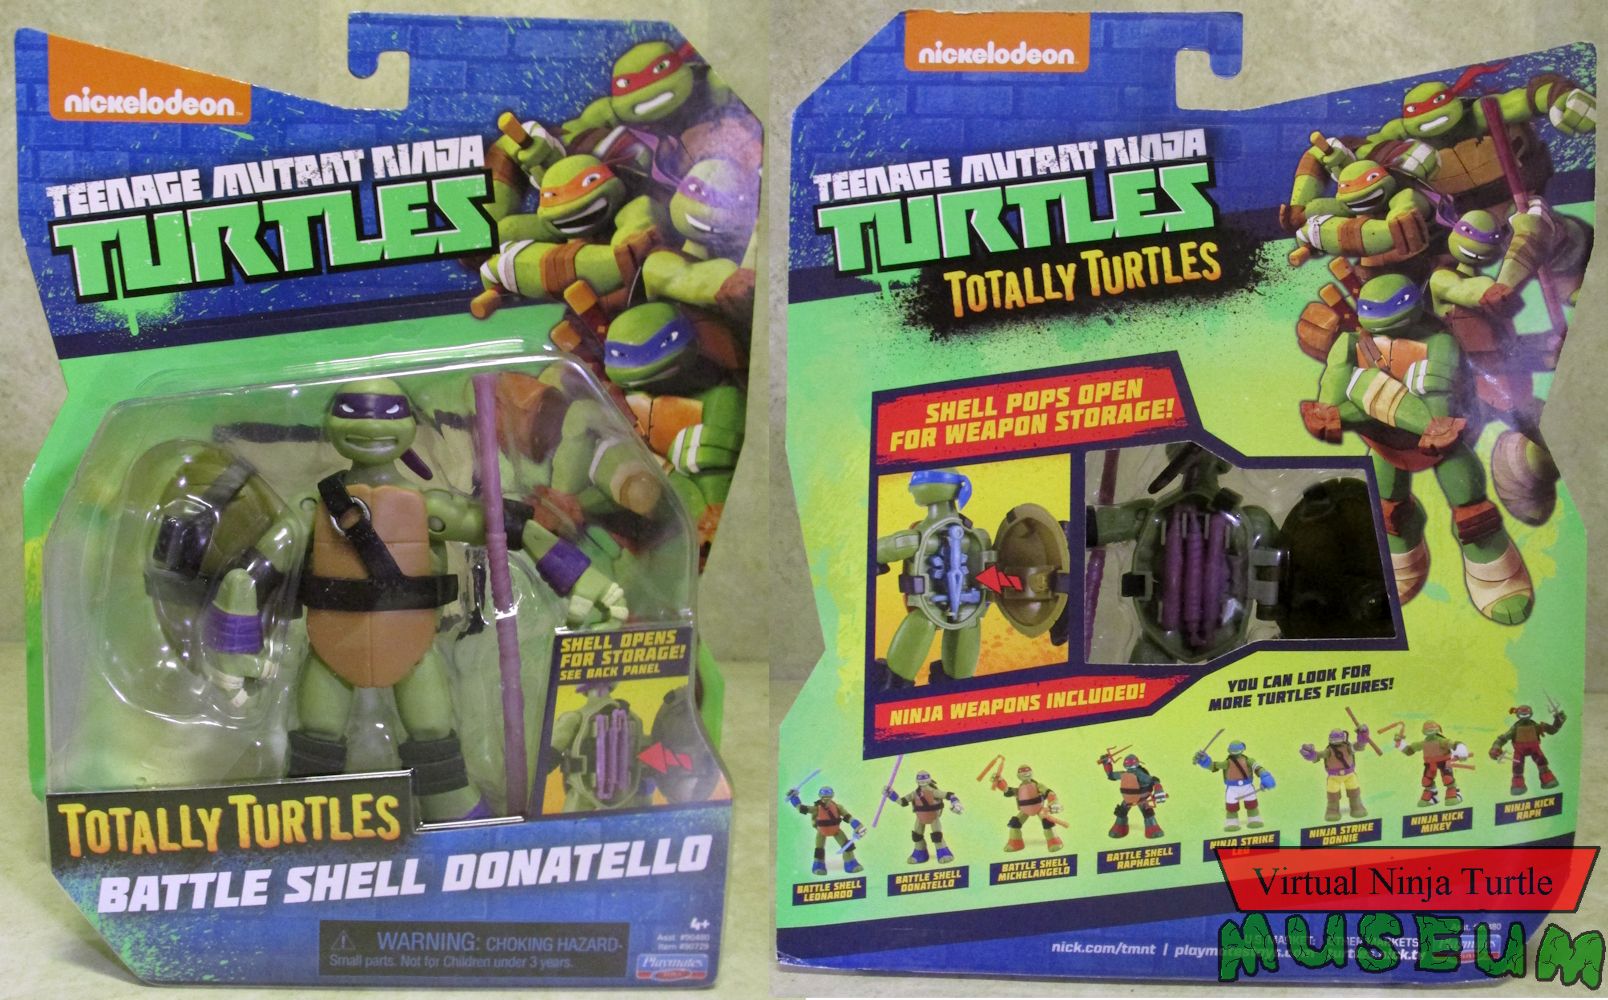 Totally Turtles card front and back